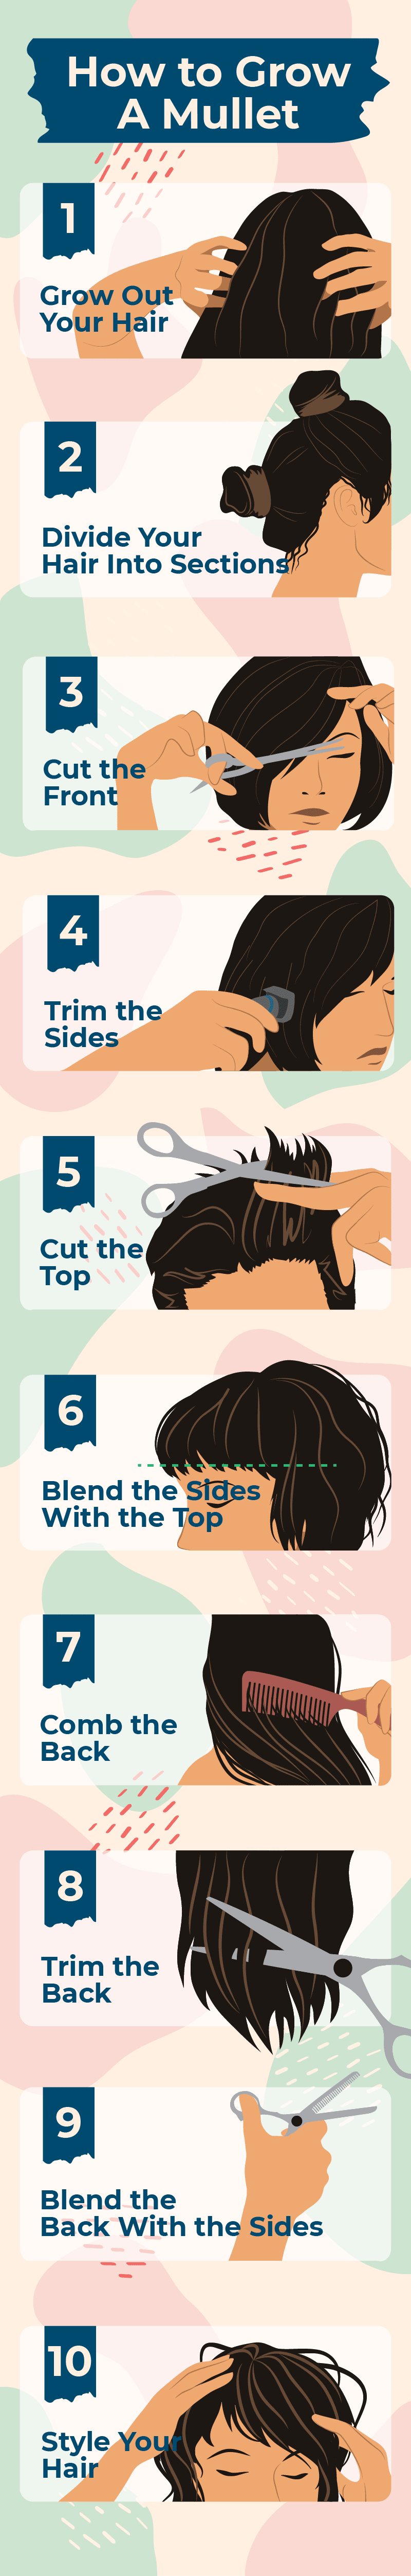 How to Grow a Mullet Infographic Image